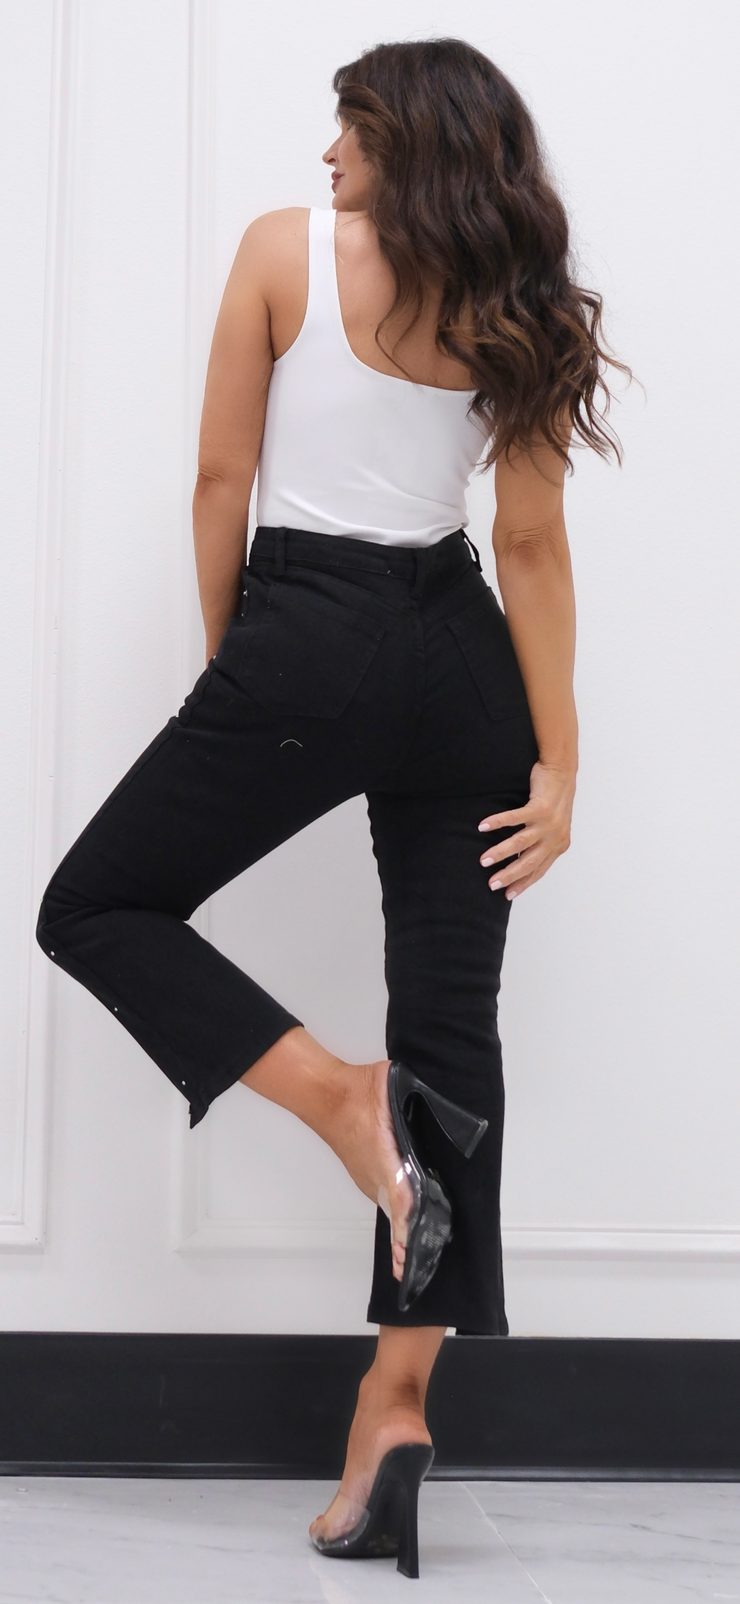 A little twinkle black jeans with stud detailwith